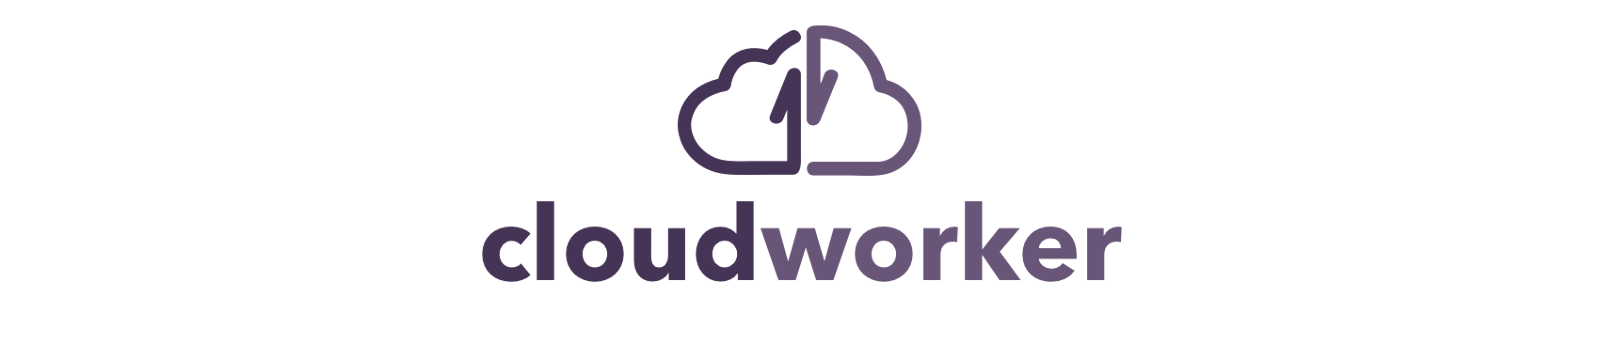 Cloudworker  -  A local Cloudflare Worker Runner